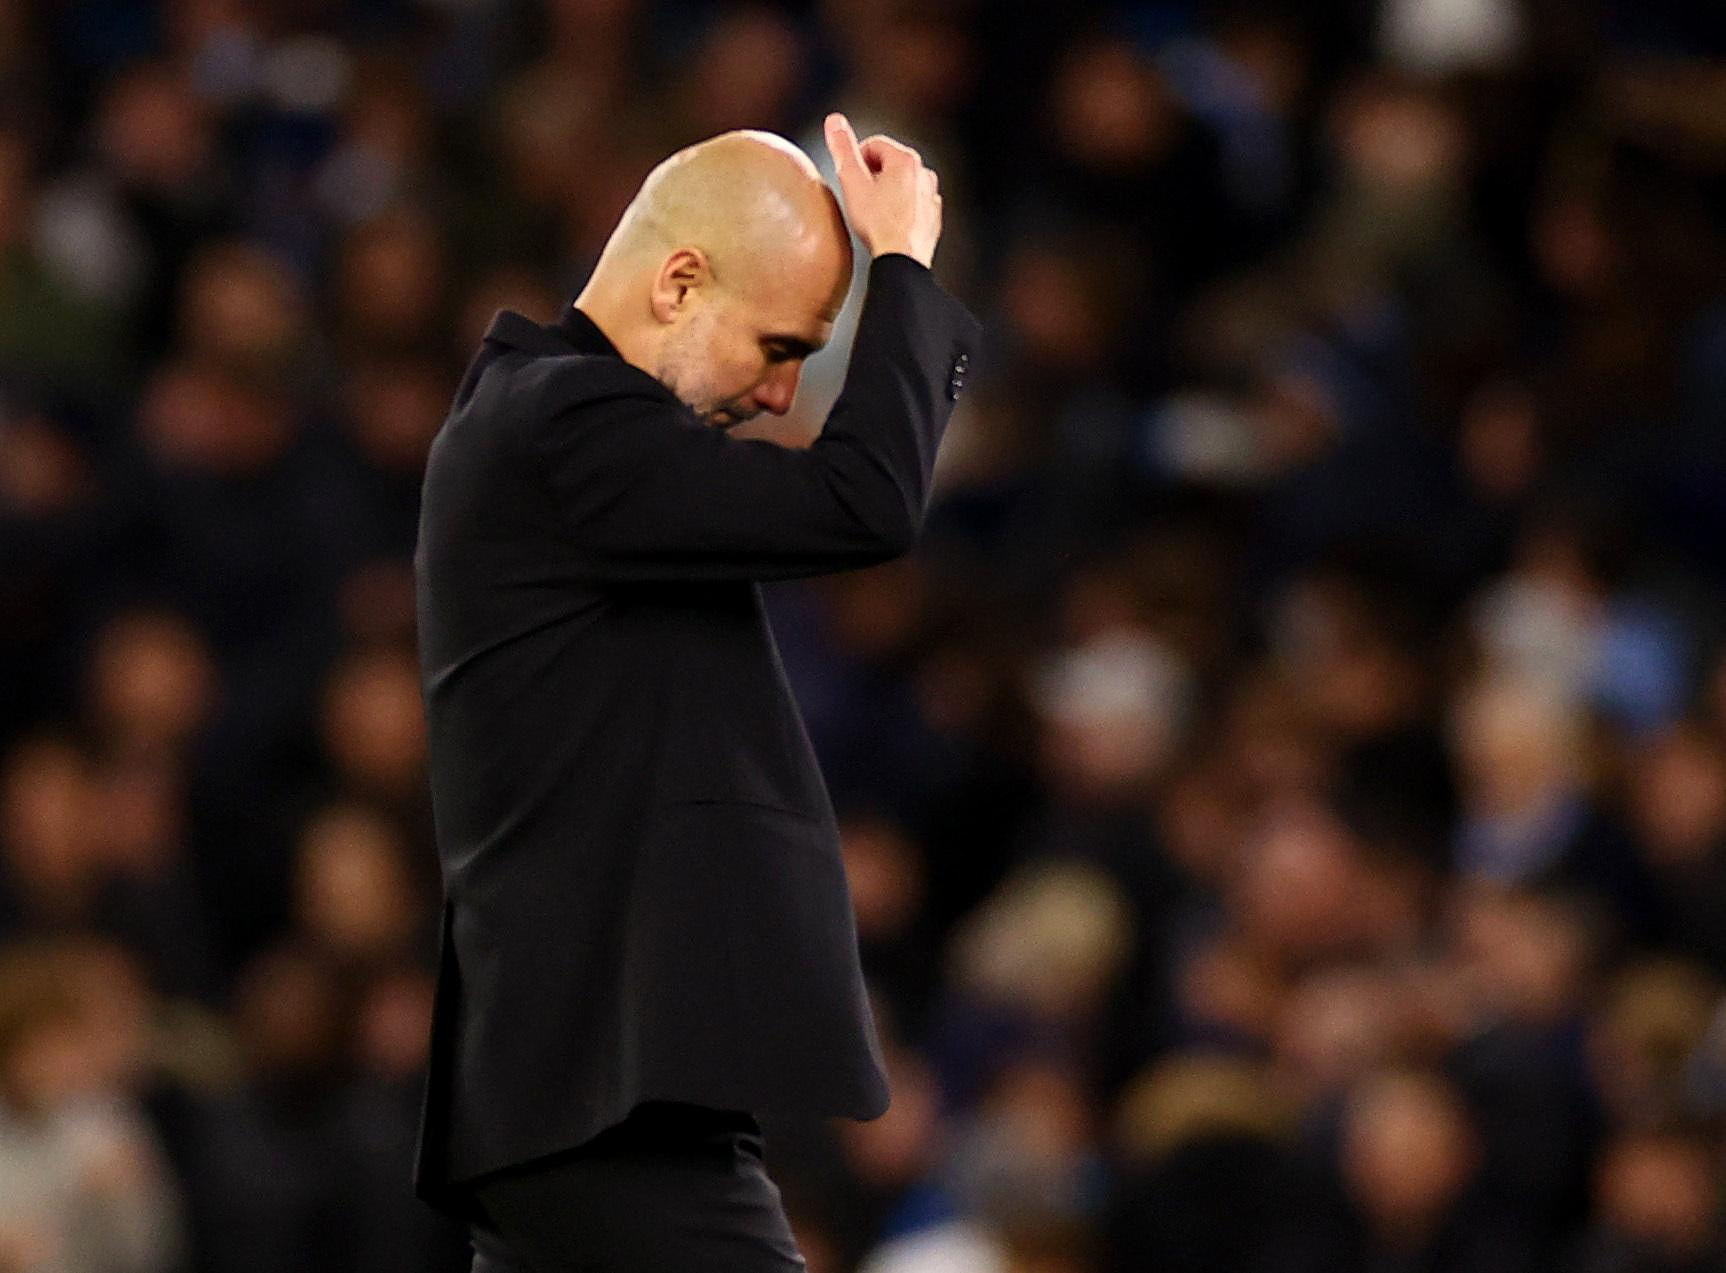 Champions League: Manchester City played “exceptionally”, according to Guardiola